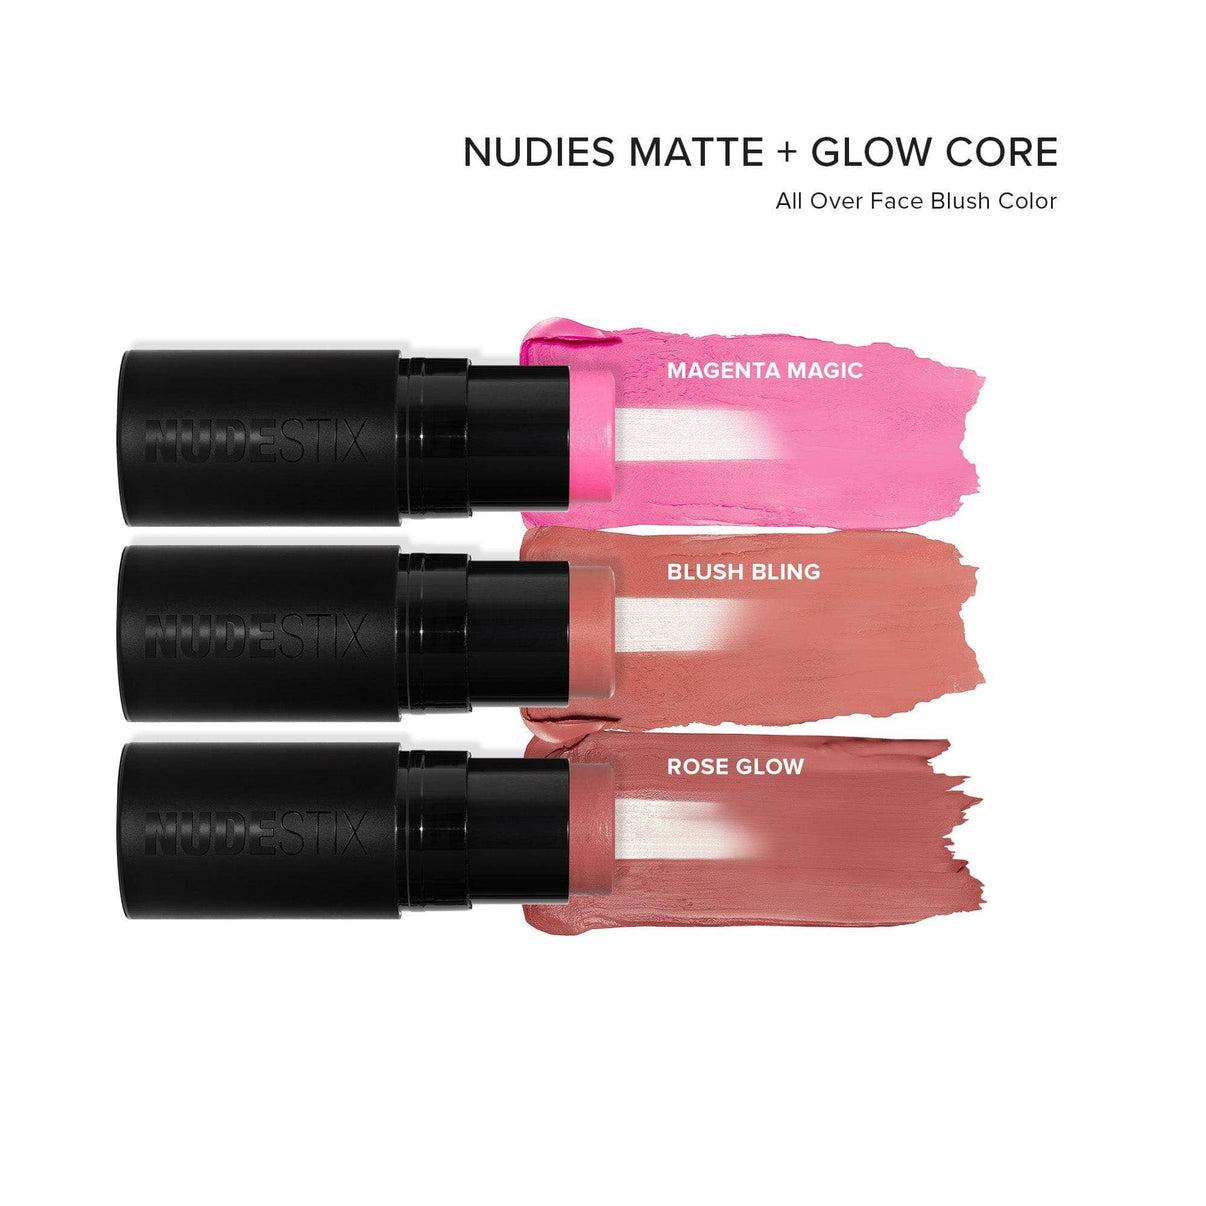 Pink Blush & Glow Core Kit with texture swatches - 2